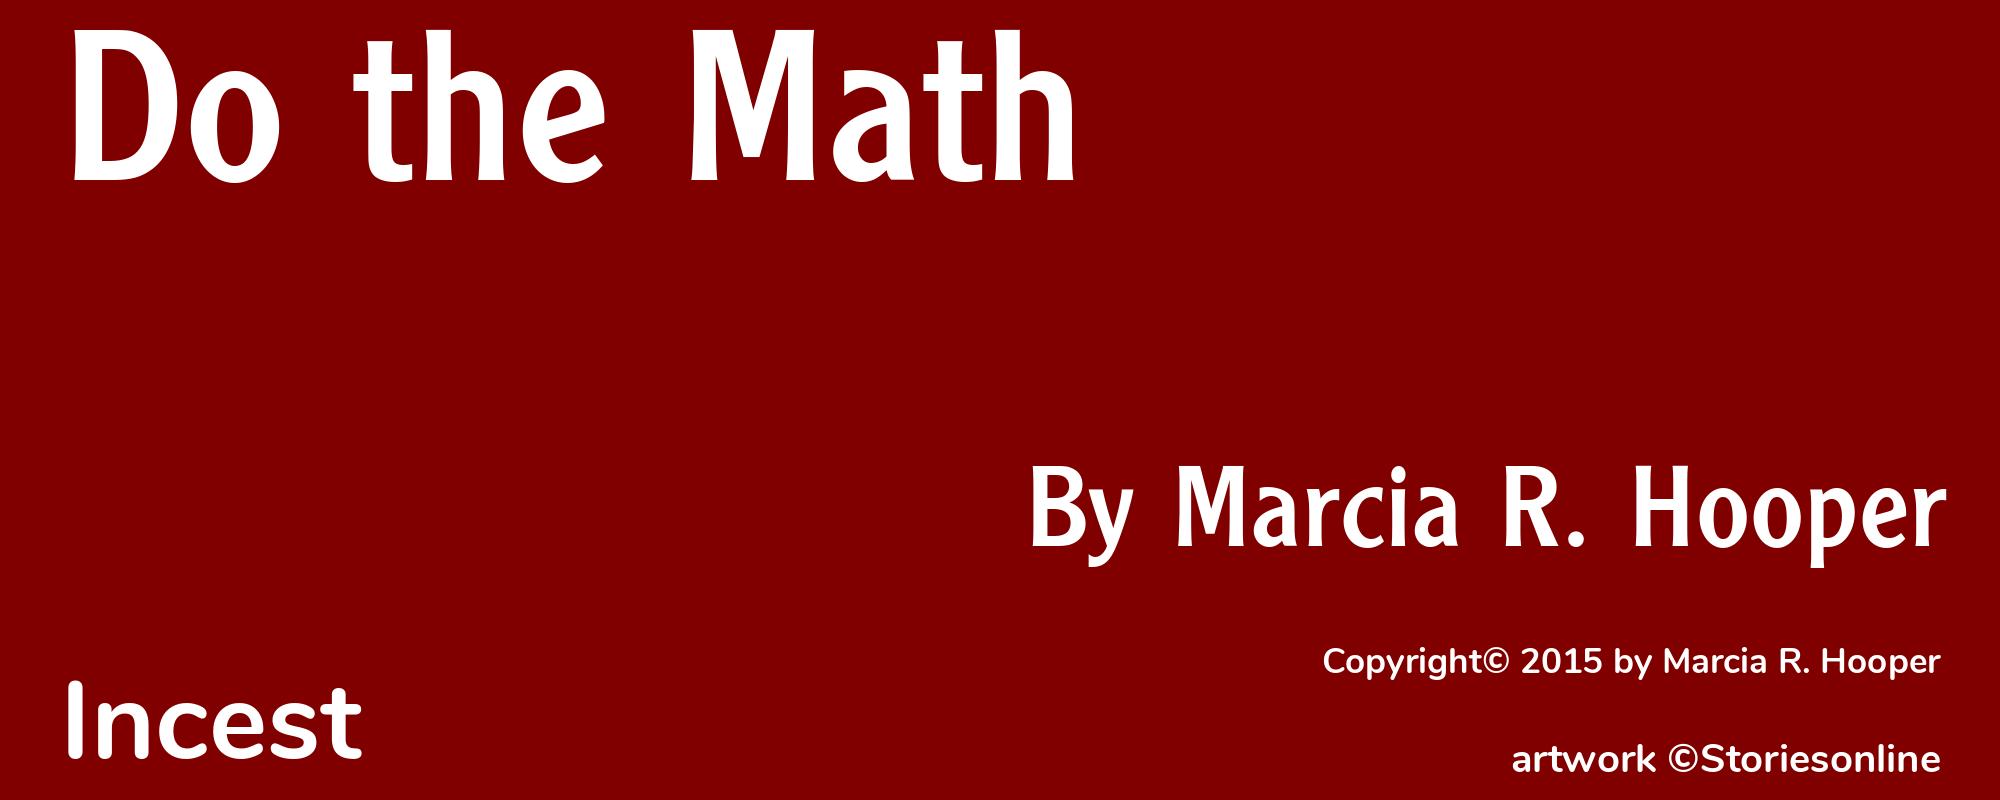 Do the Math - Cover